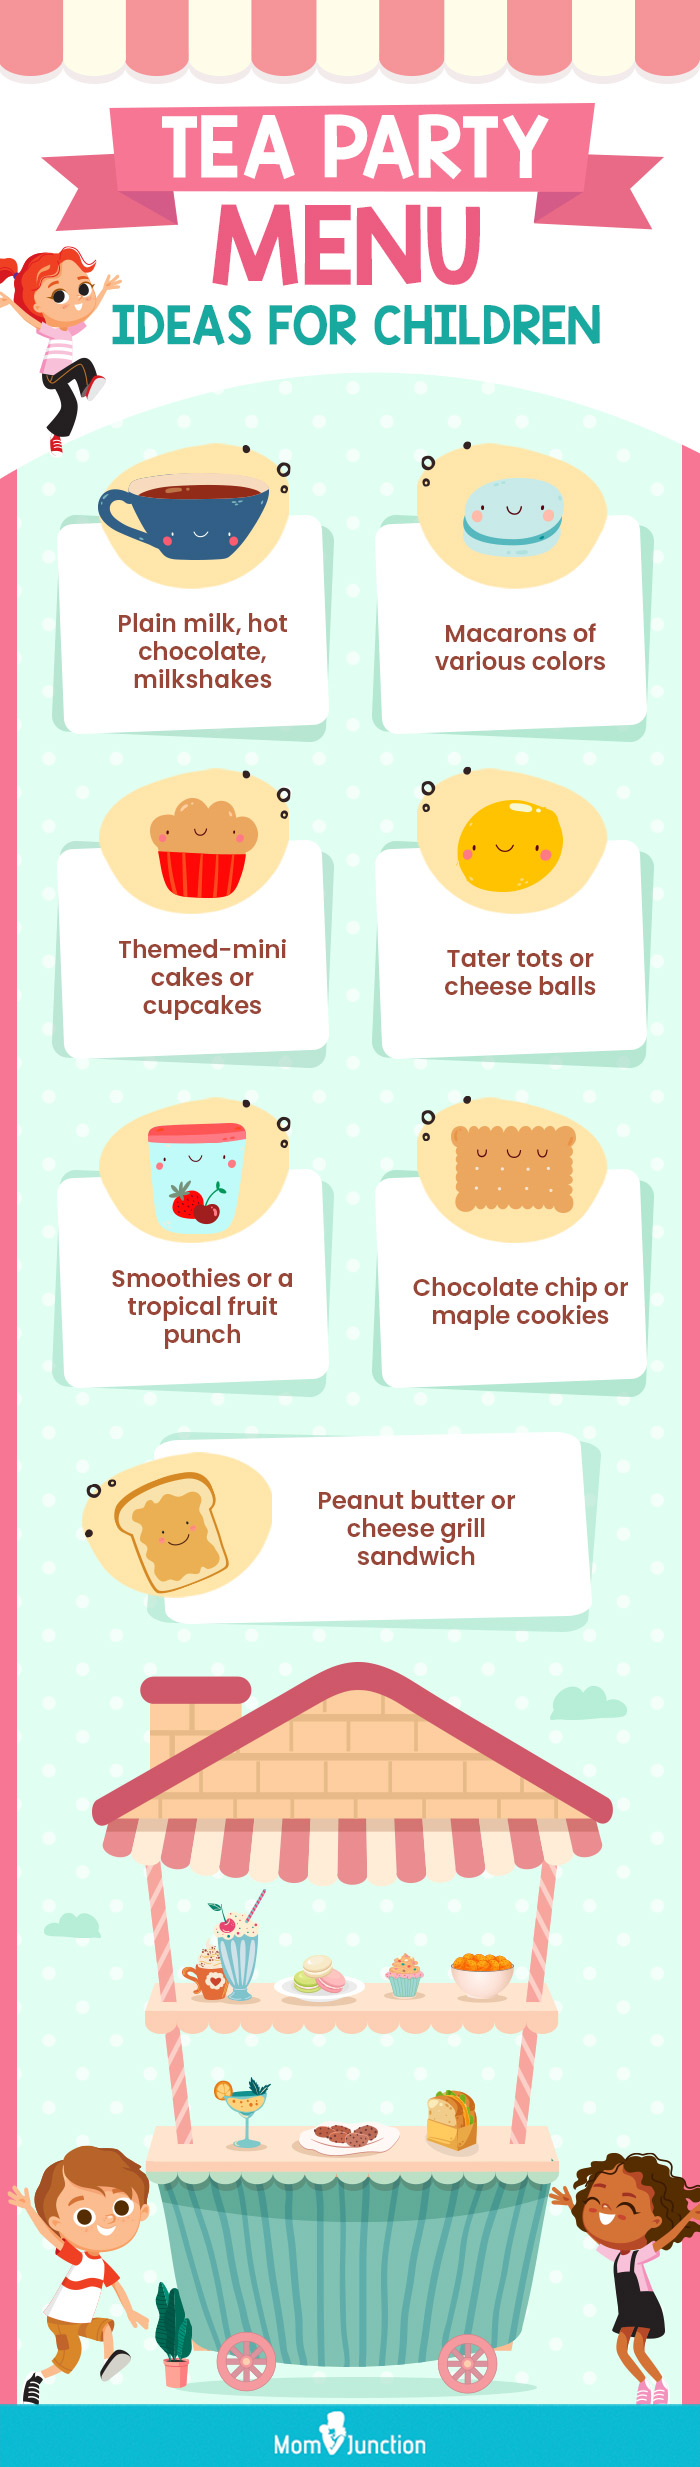 assist your child in hosting a scrumptious tea party final(infographic)